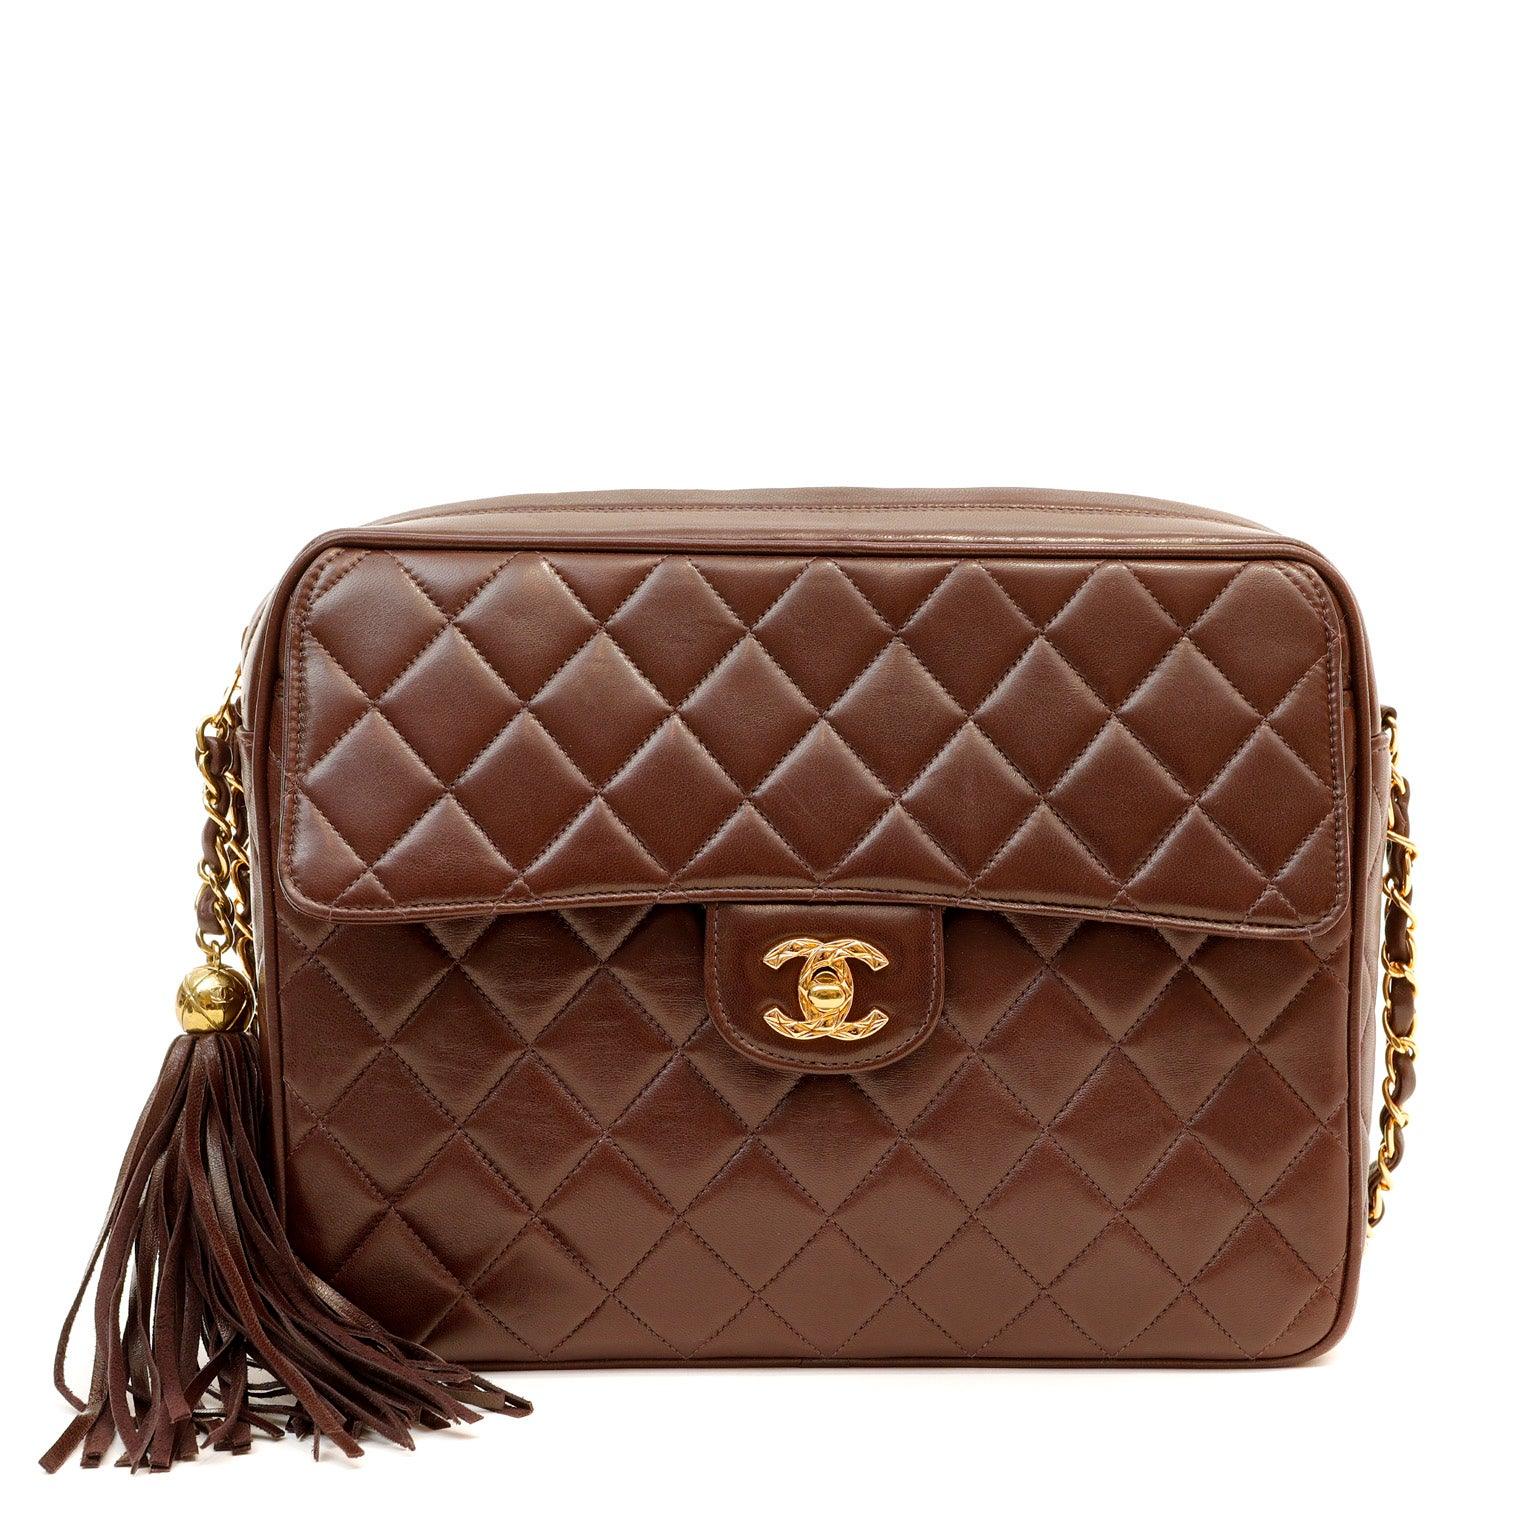 Camera leather handbag Chanel Brown in Leather - 33959883